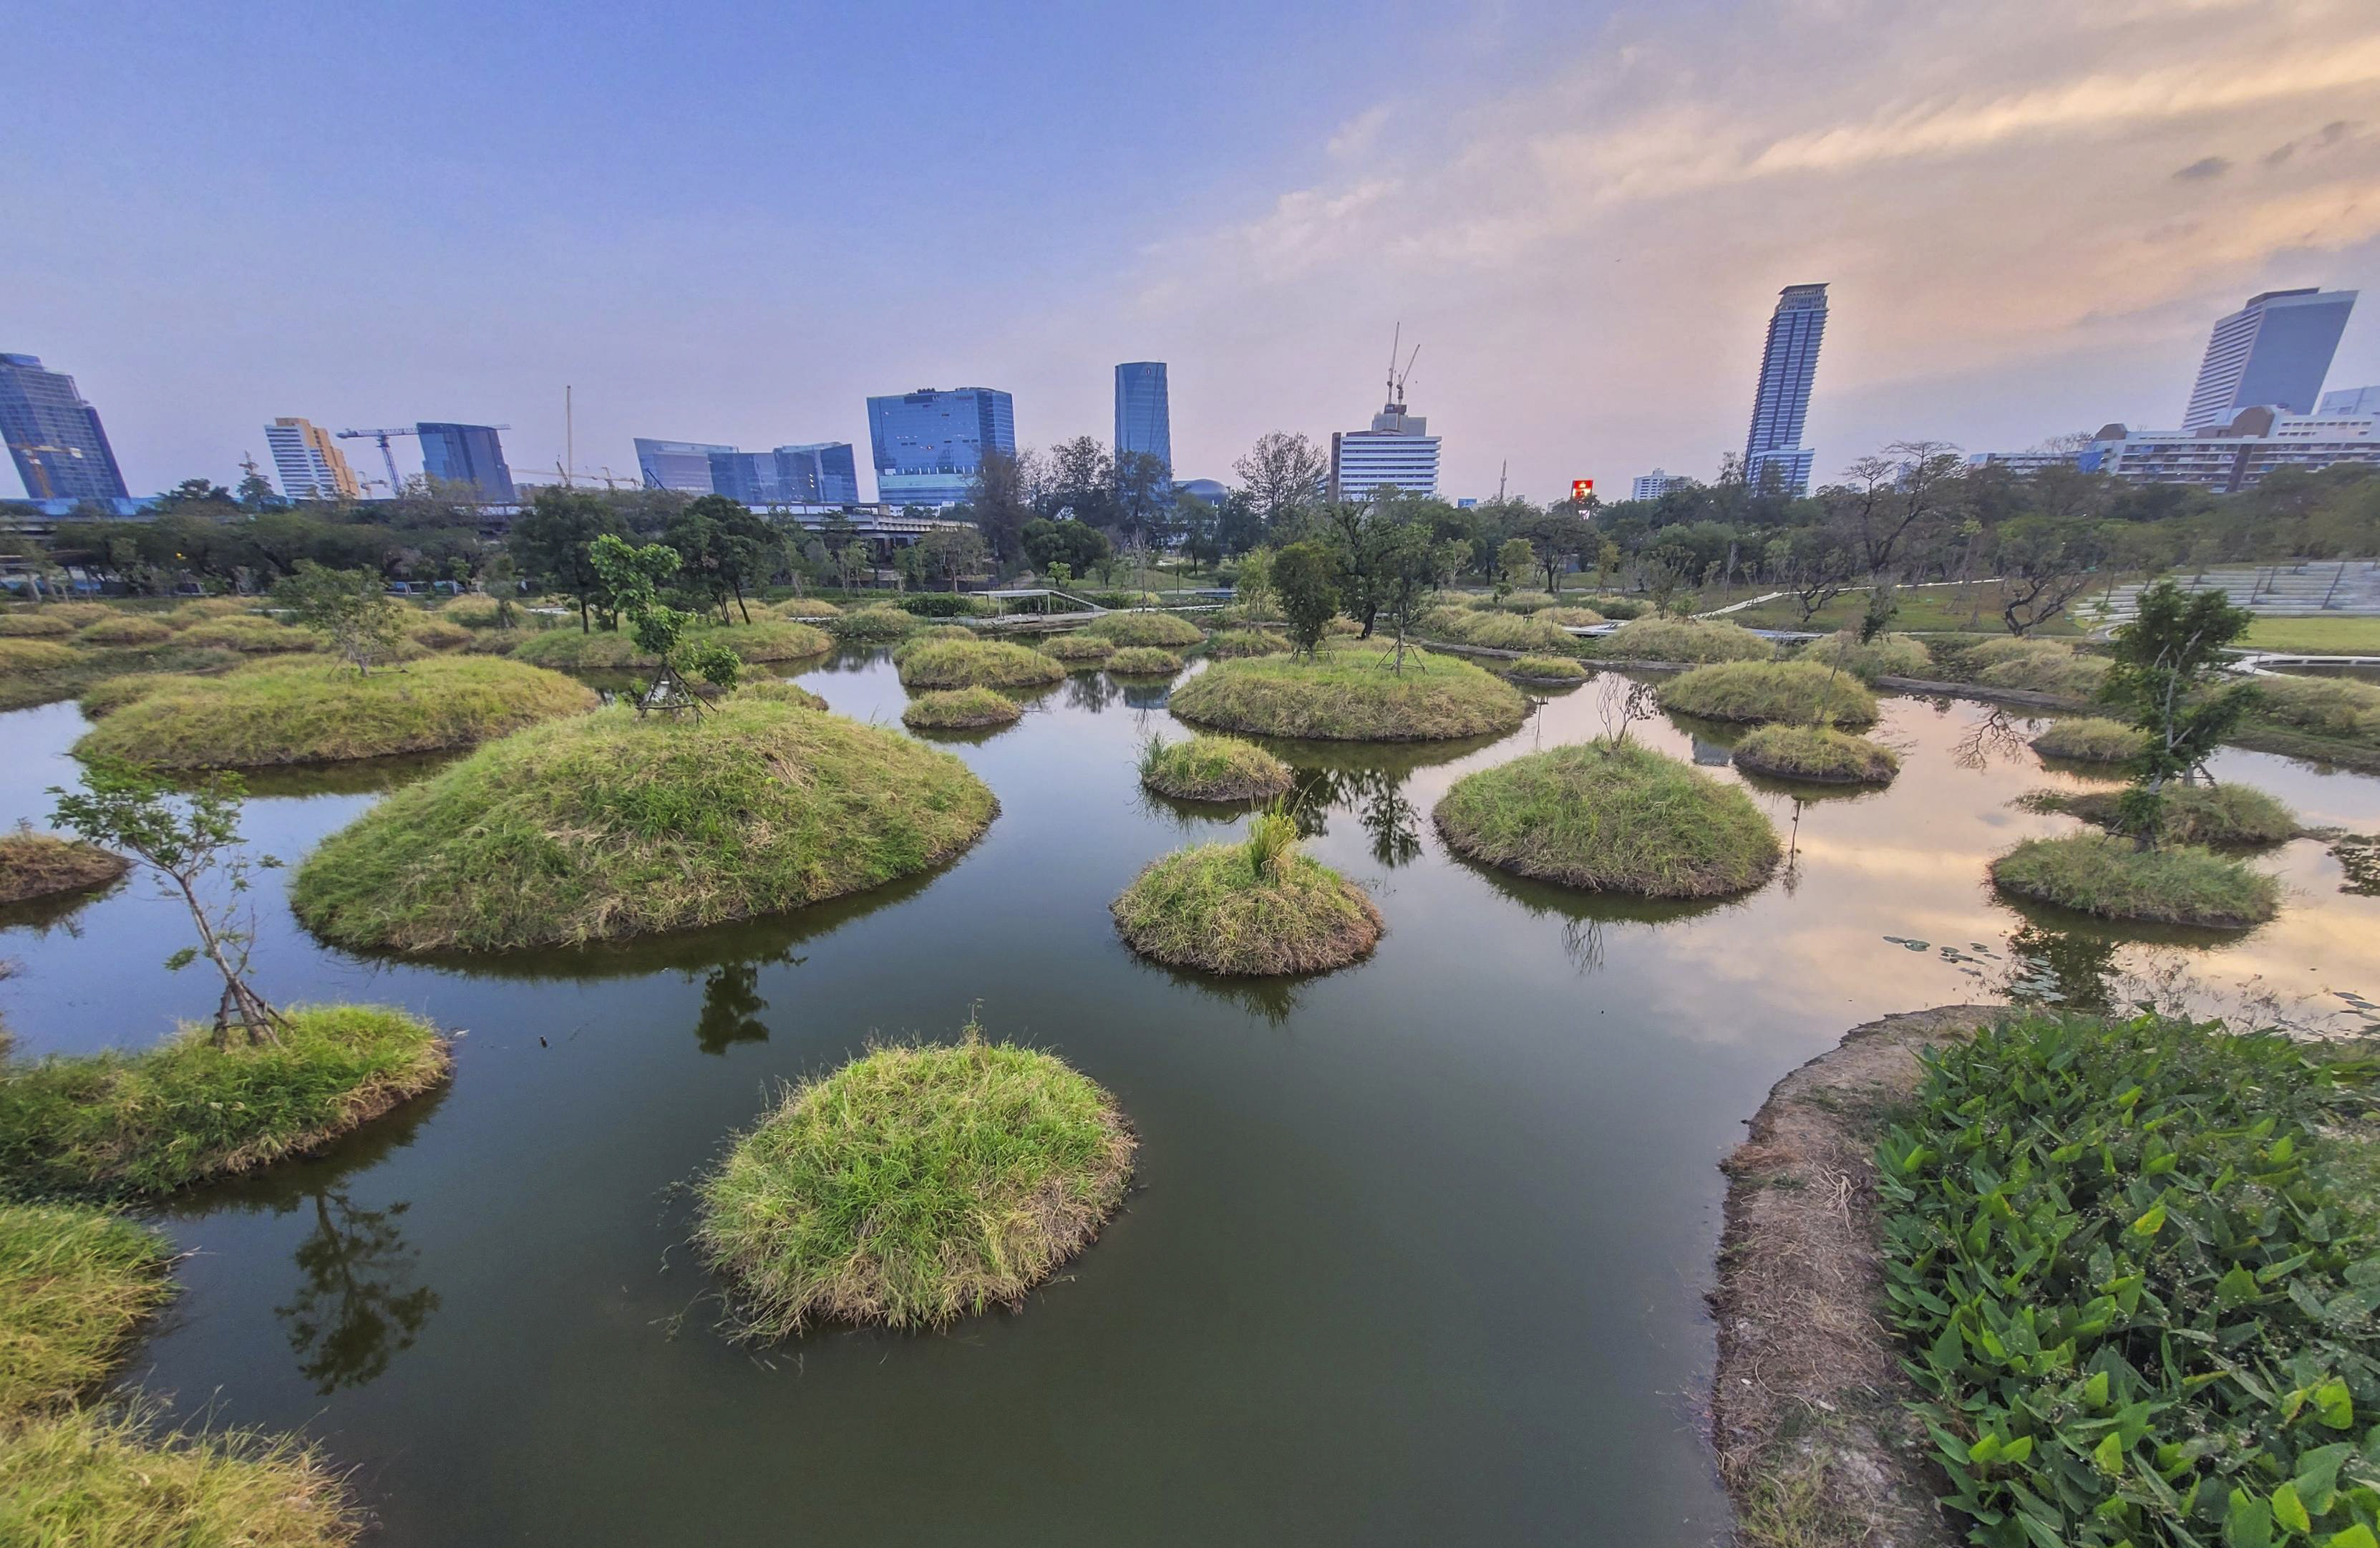 Seven new tourist attractions have opened up in Southeast Asia. Above: the Benjakitti Forest Park, at 72 hectares, is Bangkok’s biggest park. Photo: Ronan O’Connell